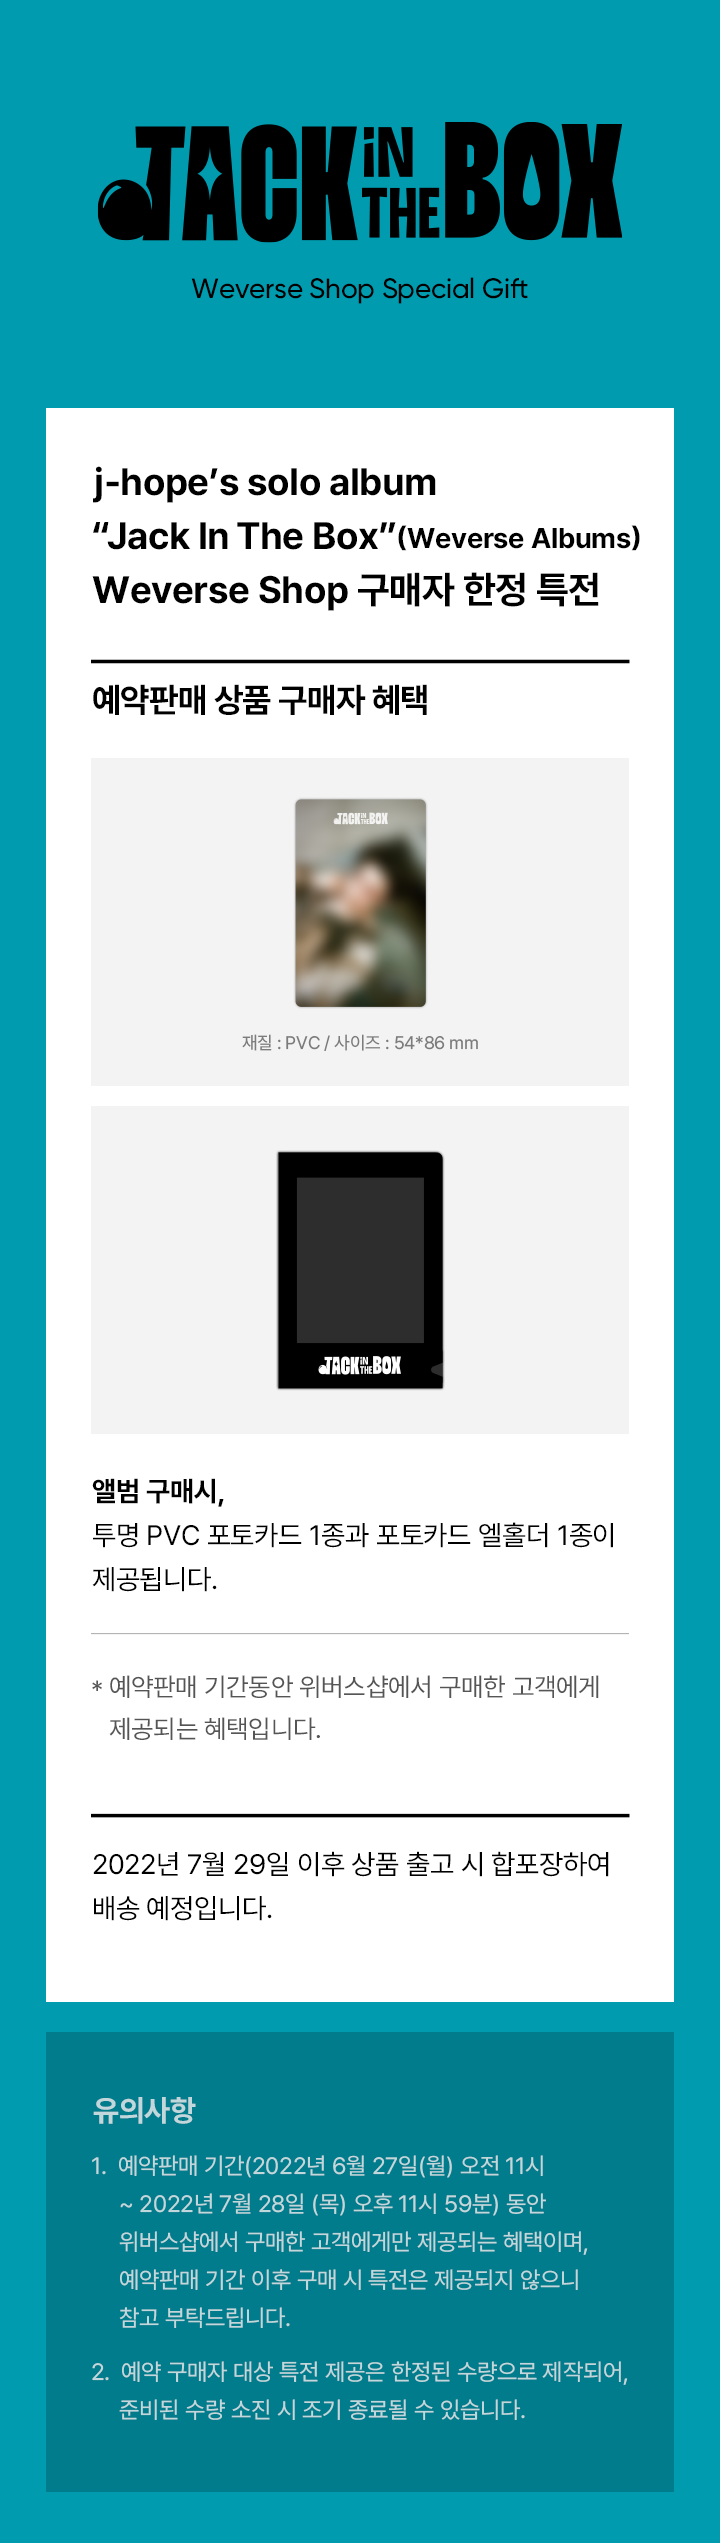 J-HOPE - The 1st Solo Album Jack In The Box (Weverse Albums) with Weverse POB